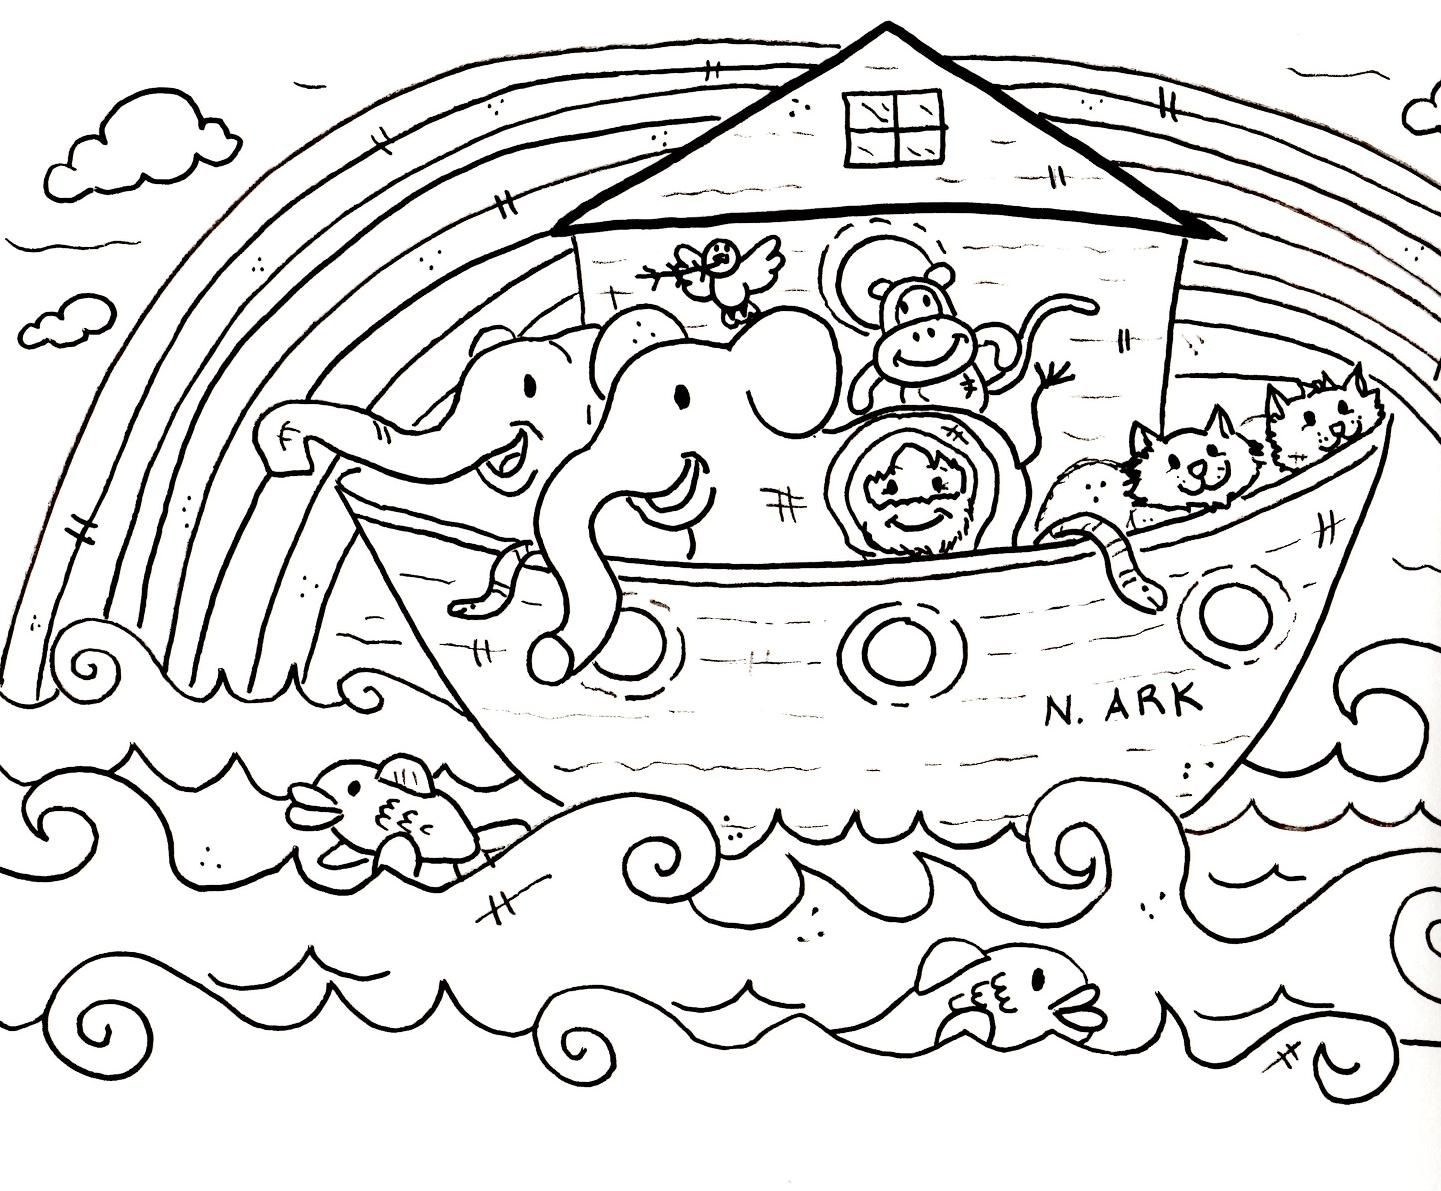 Children Coloring Pages For Church |  Sunday School Coloring - Free Printable Sunday School Coloring Pages